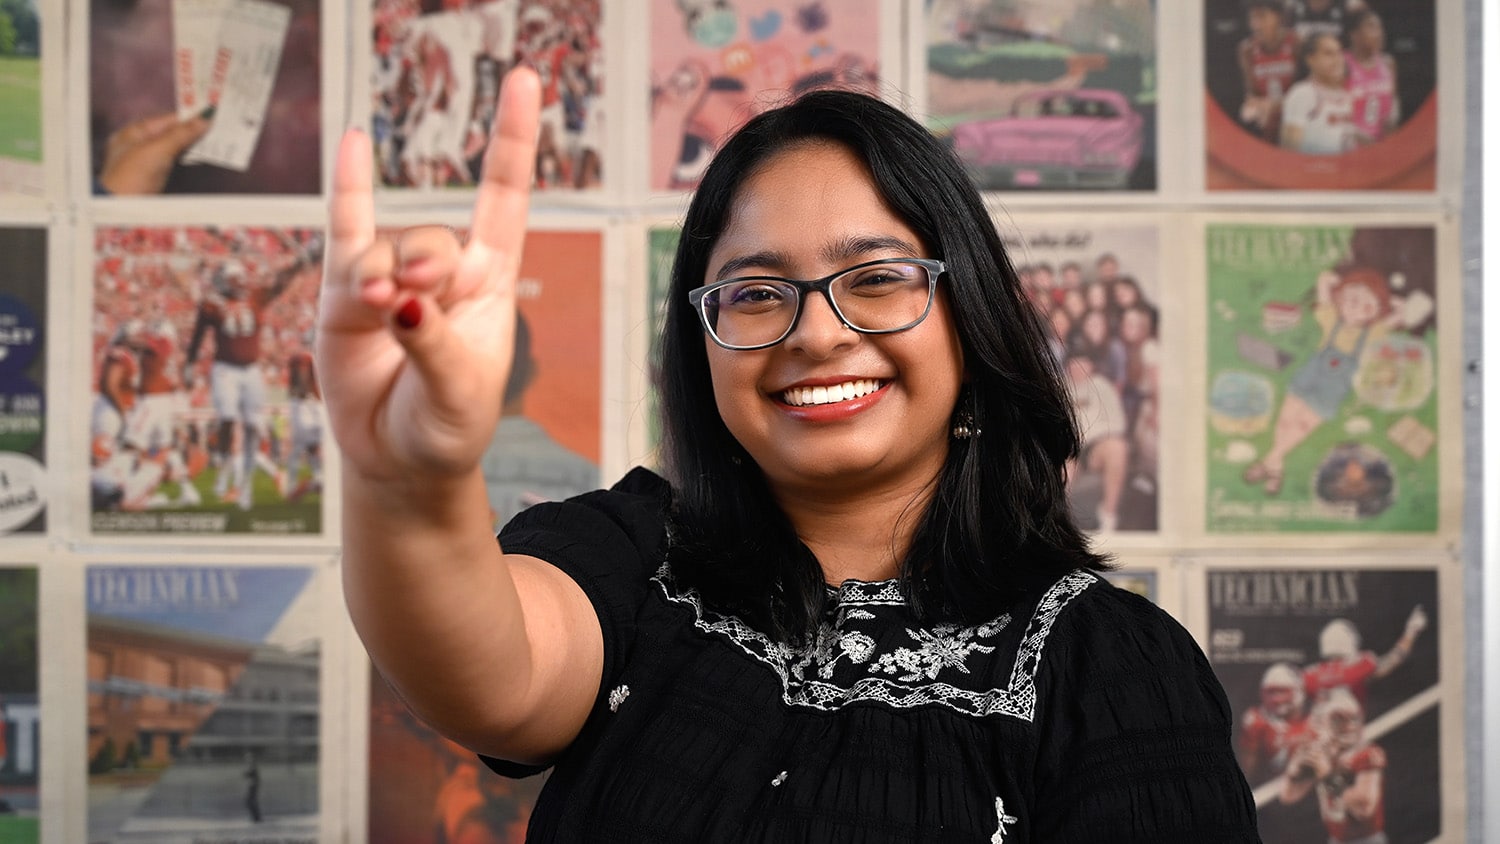 Biological sciences student Shilpa Giri smiles in front of a wall covered in issues of Technician